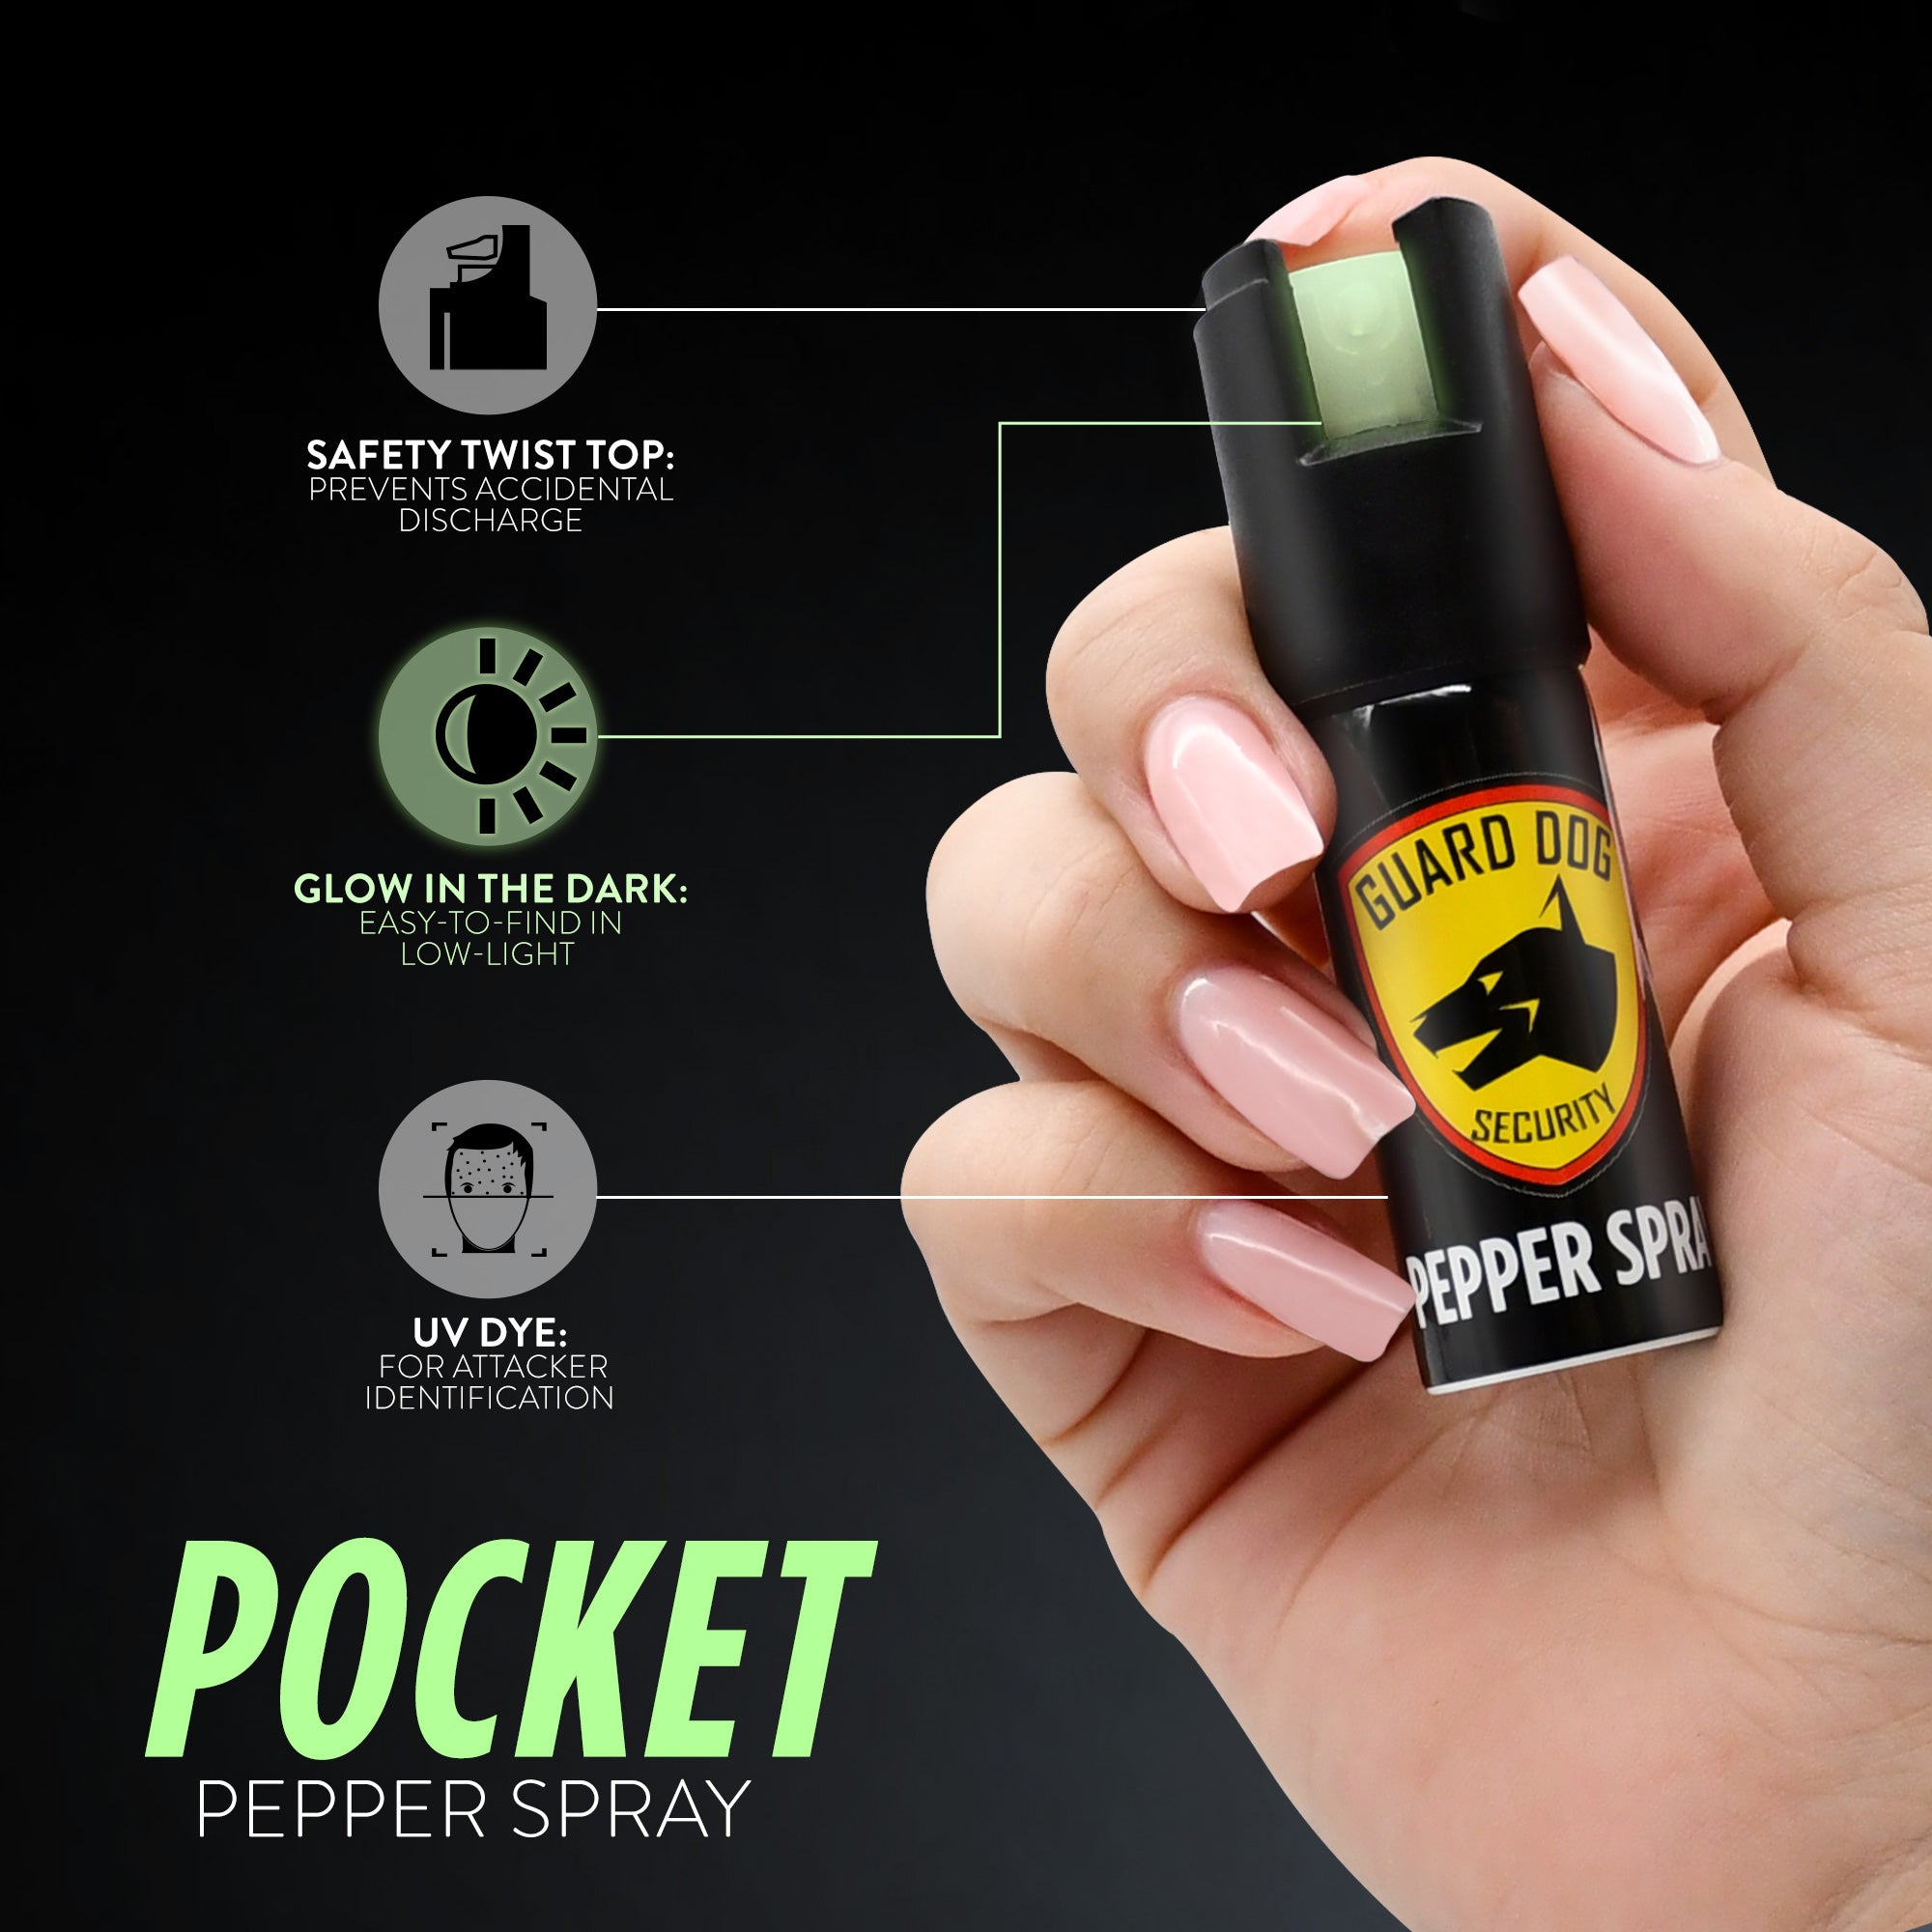 Glow in The Dark Pepper Spray - Twist Top Safety Lock - Compact Size, Police Grade Formula - Best Self Defense Tool for Women - Up to 16 Feet